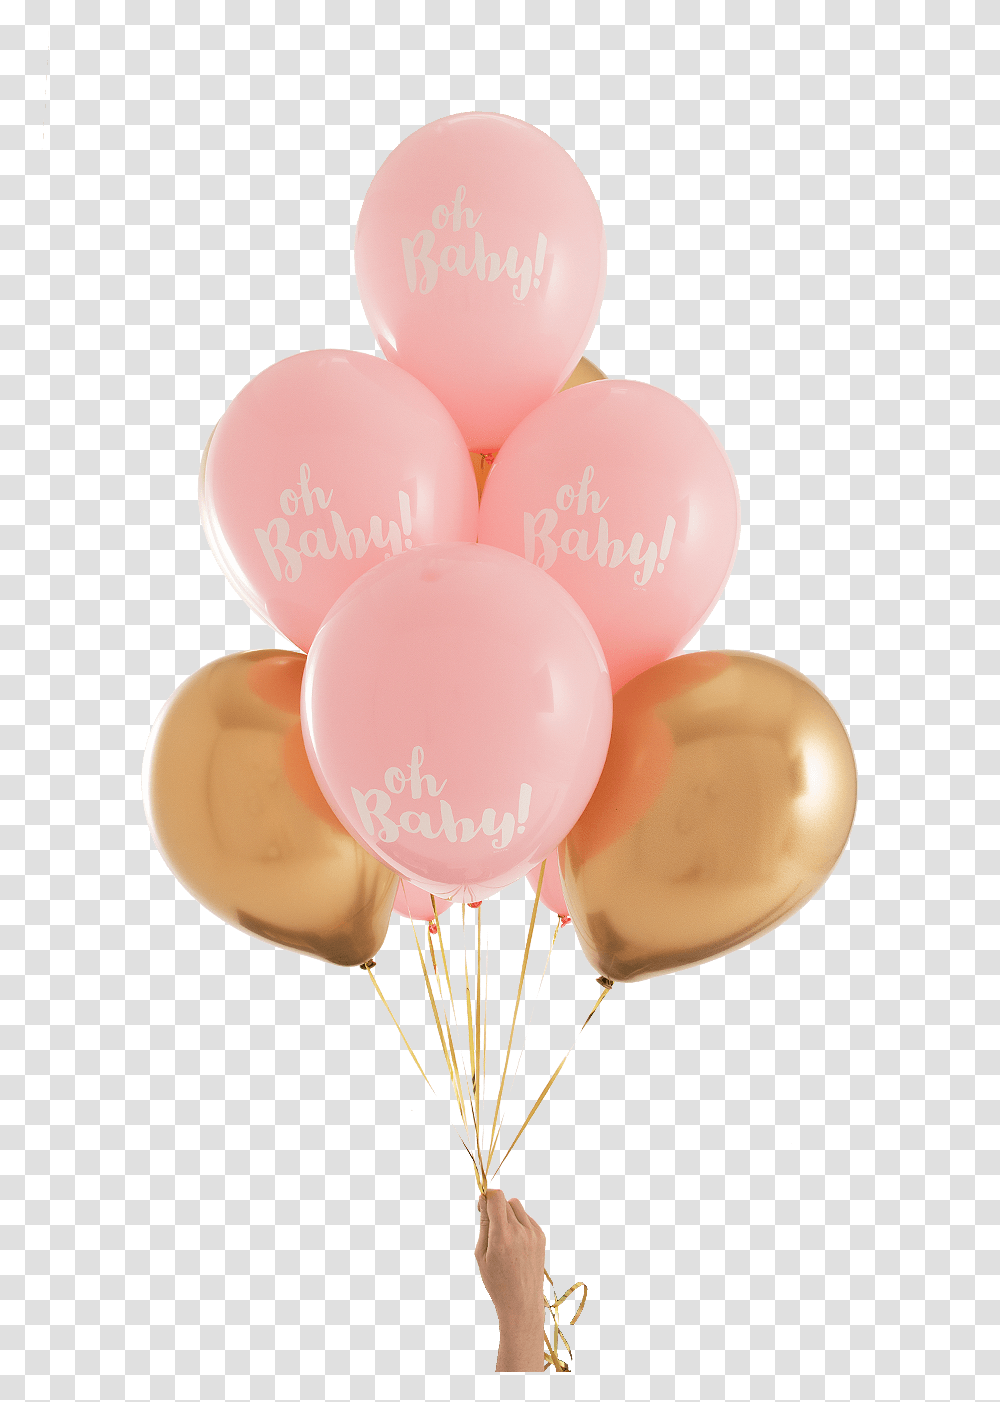 Oh Baby Pink & Gold Party Balloons 14 Balloons Pink And Gold Transparent Png